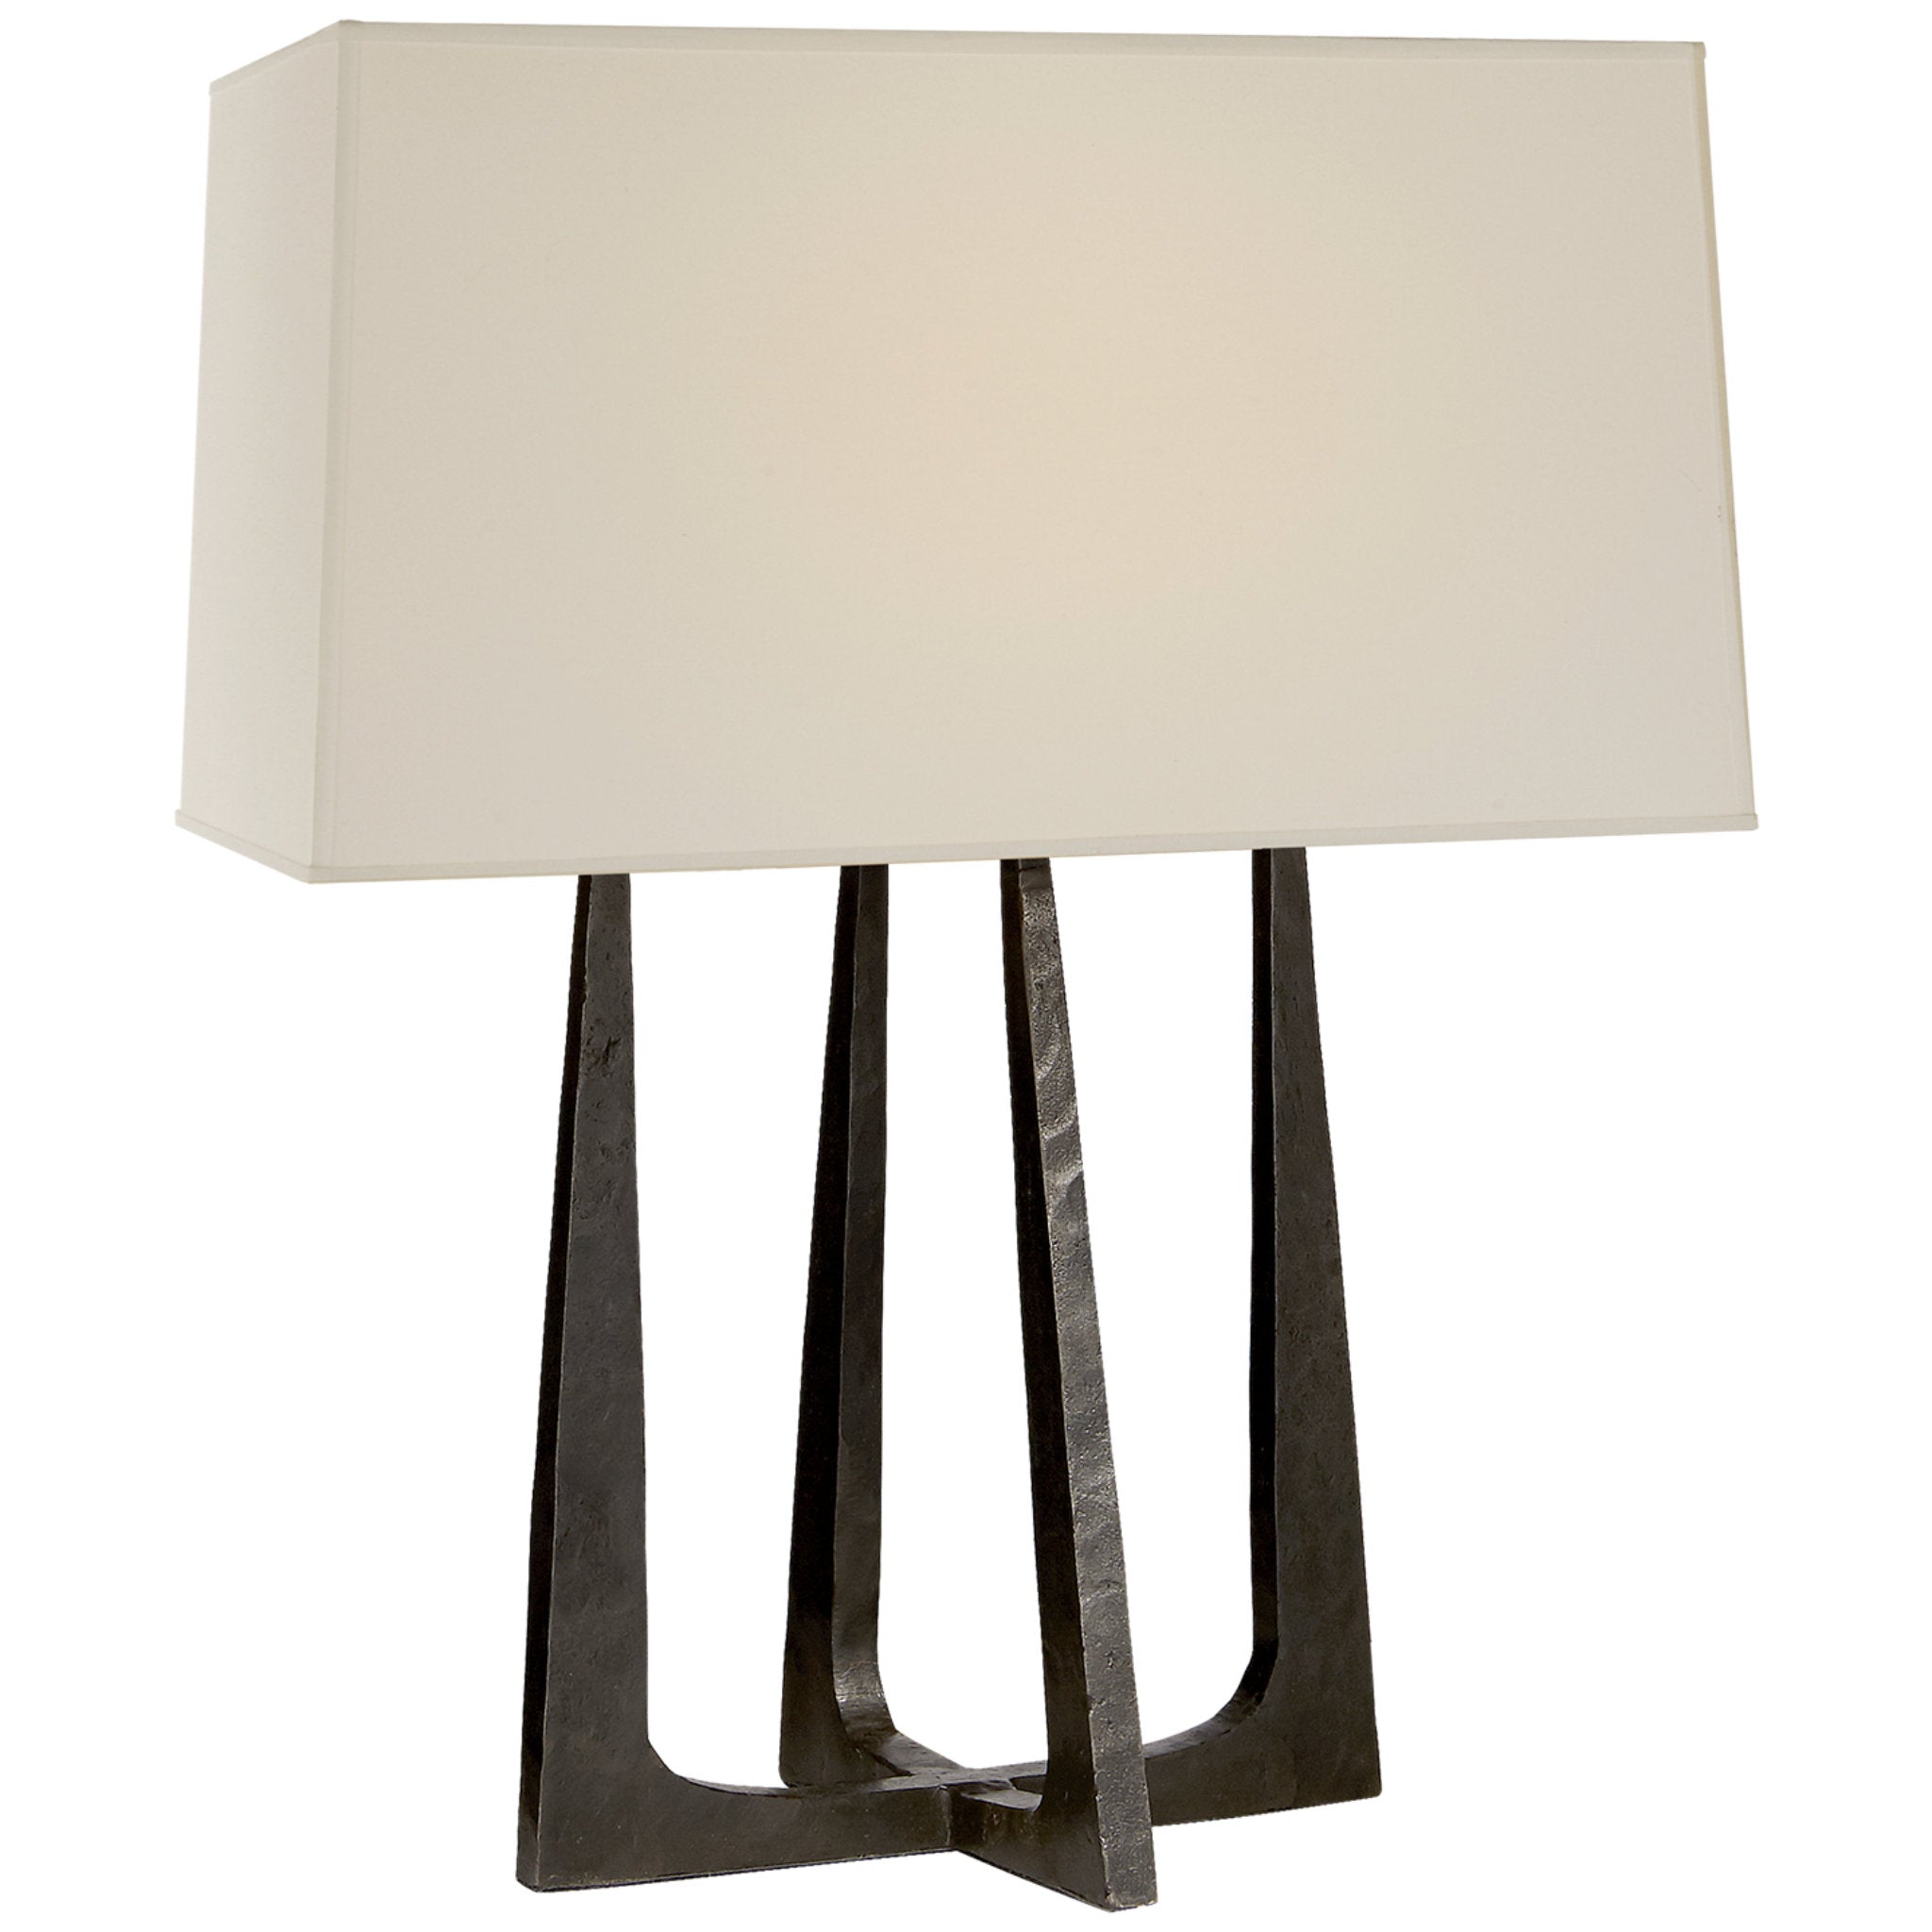 Ian K. Fowler Scala Hand-Forged Bedside Lamp in Aged Iron with Natural Percale Shade